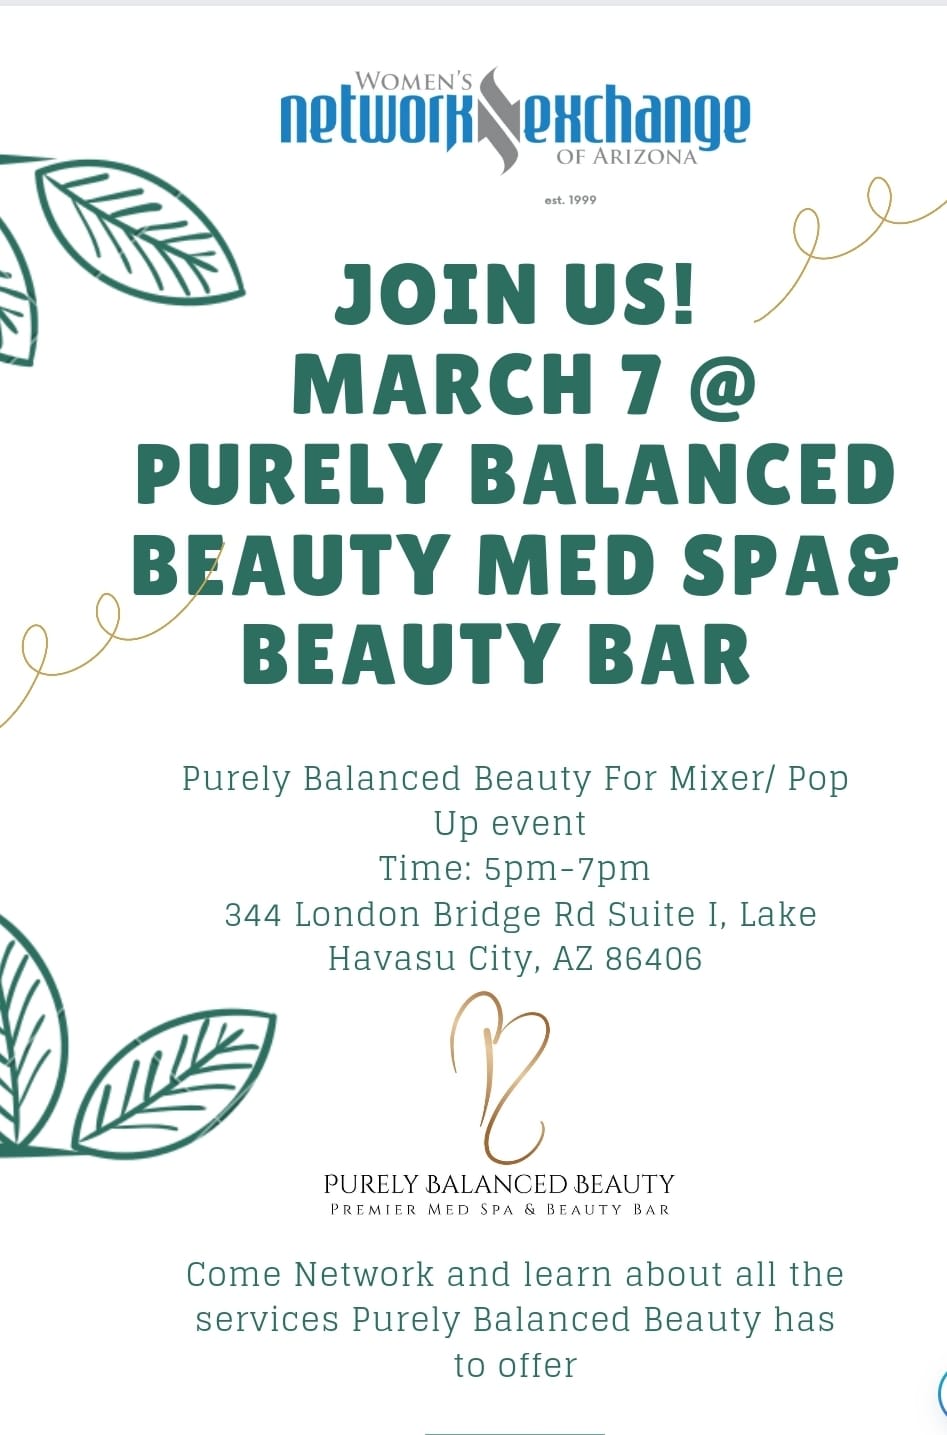 Women’s Network Exchange  Networking At Purely Balanced Beauty Med SPA